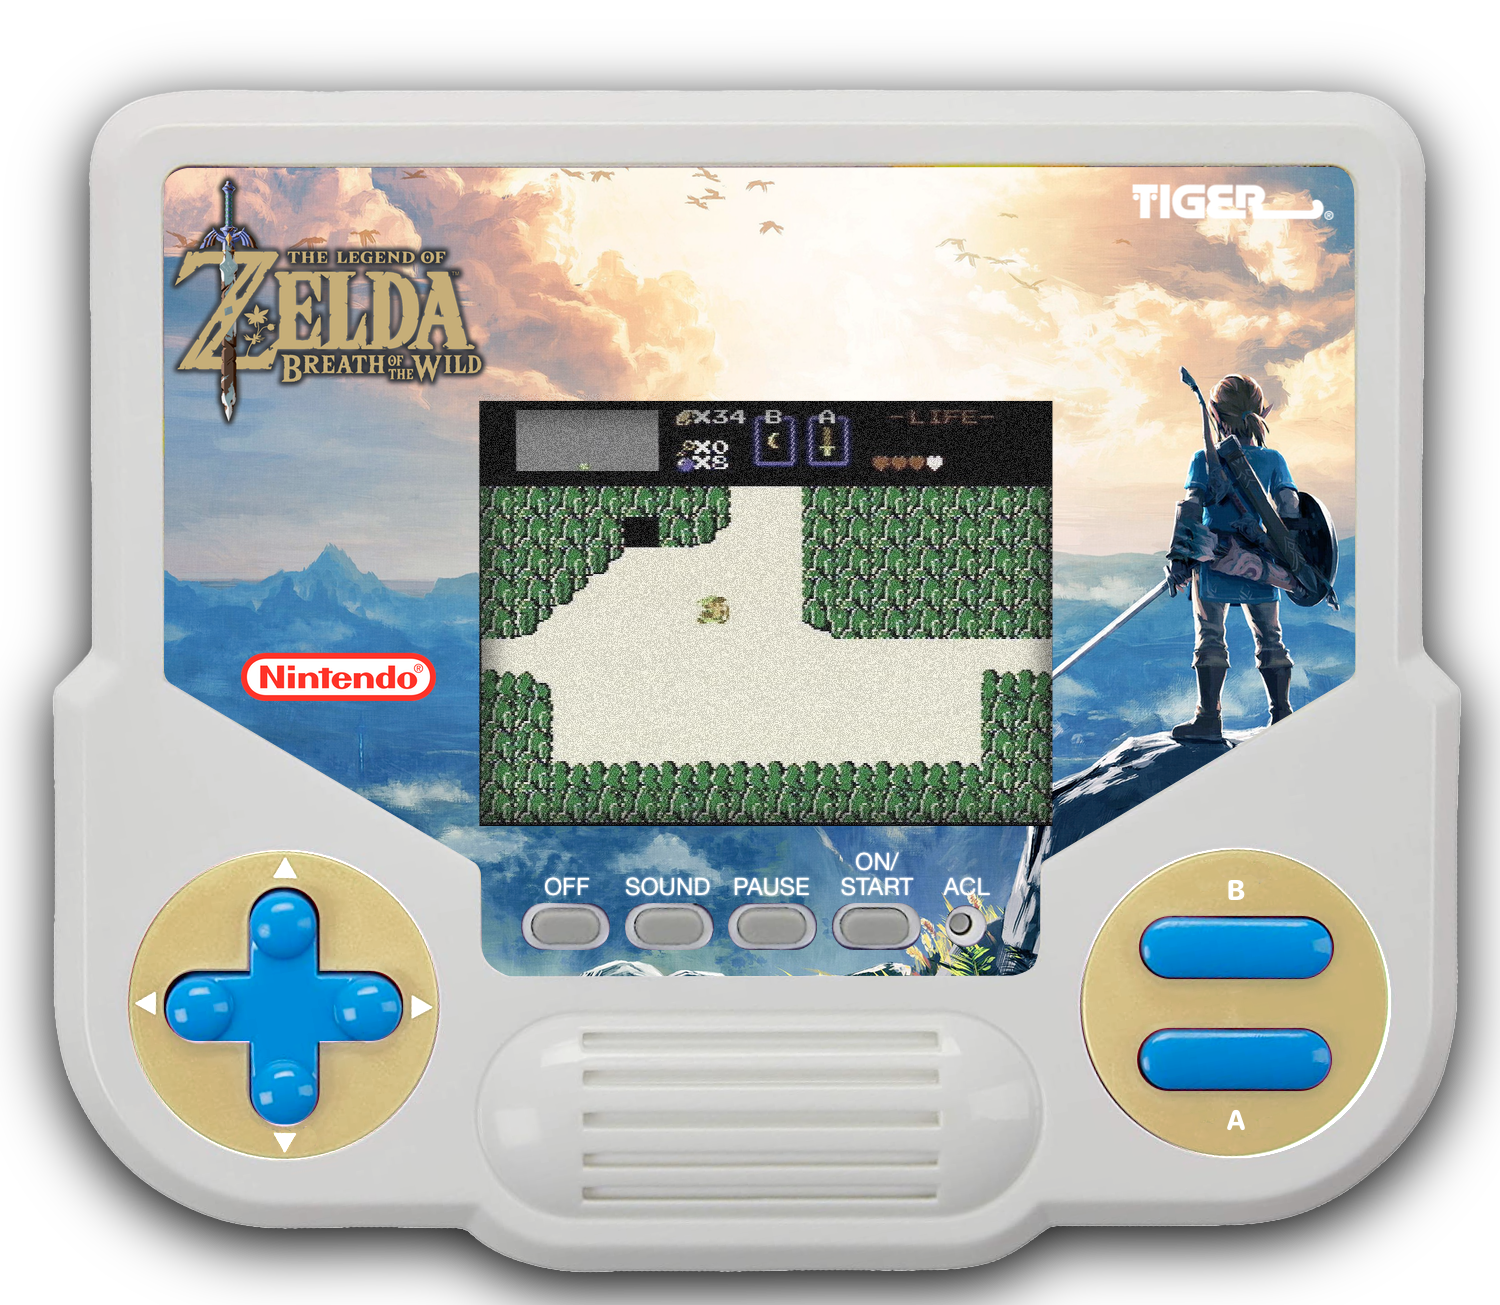 "The Legend of Zelda: Breath of the Wild" Tiger electronic game